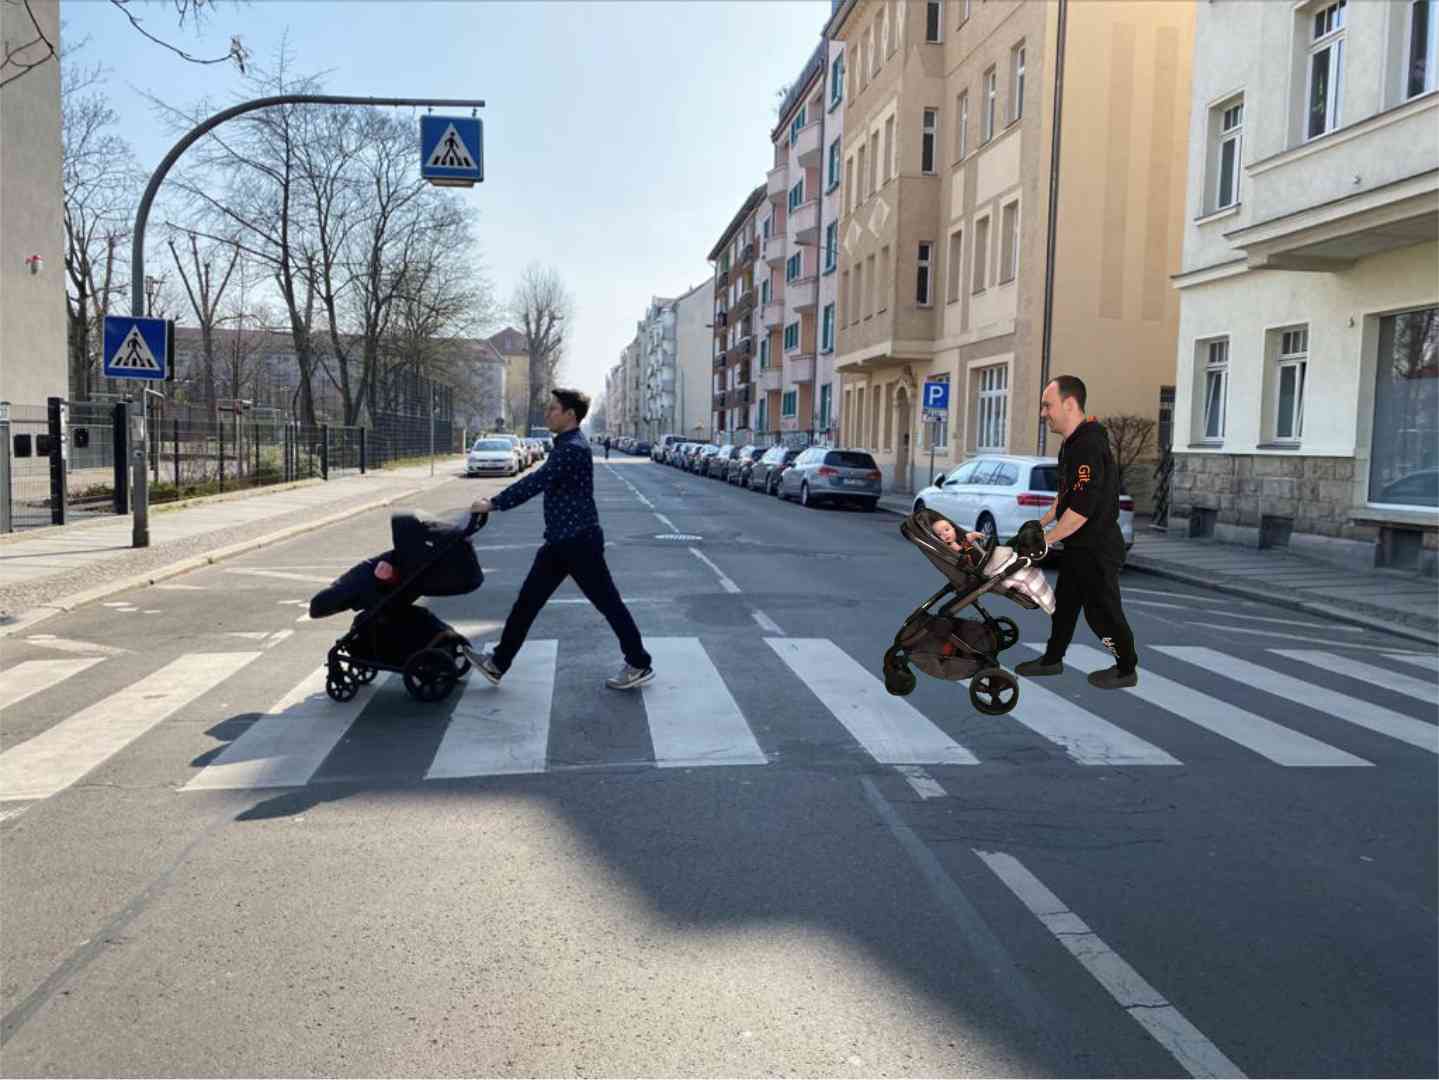 Recreating Abbey Road